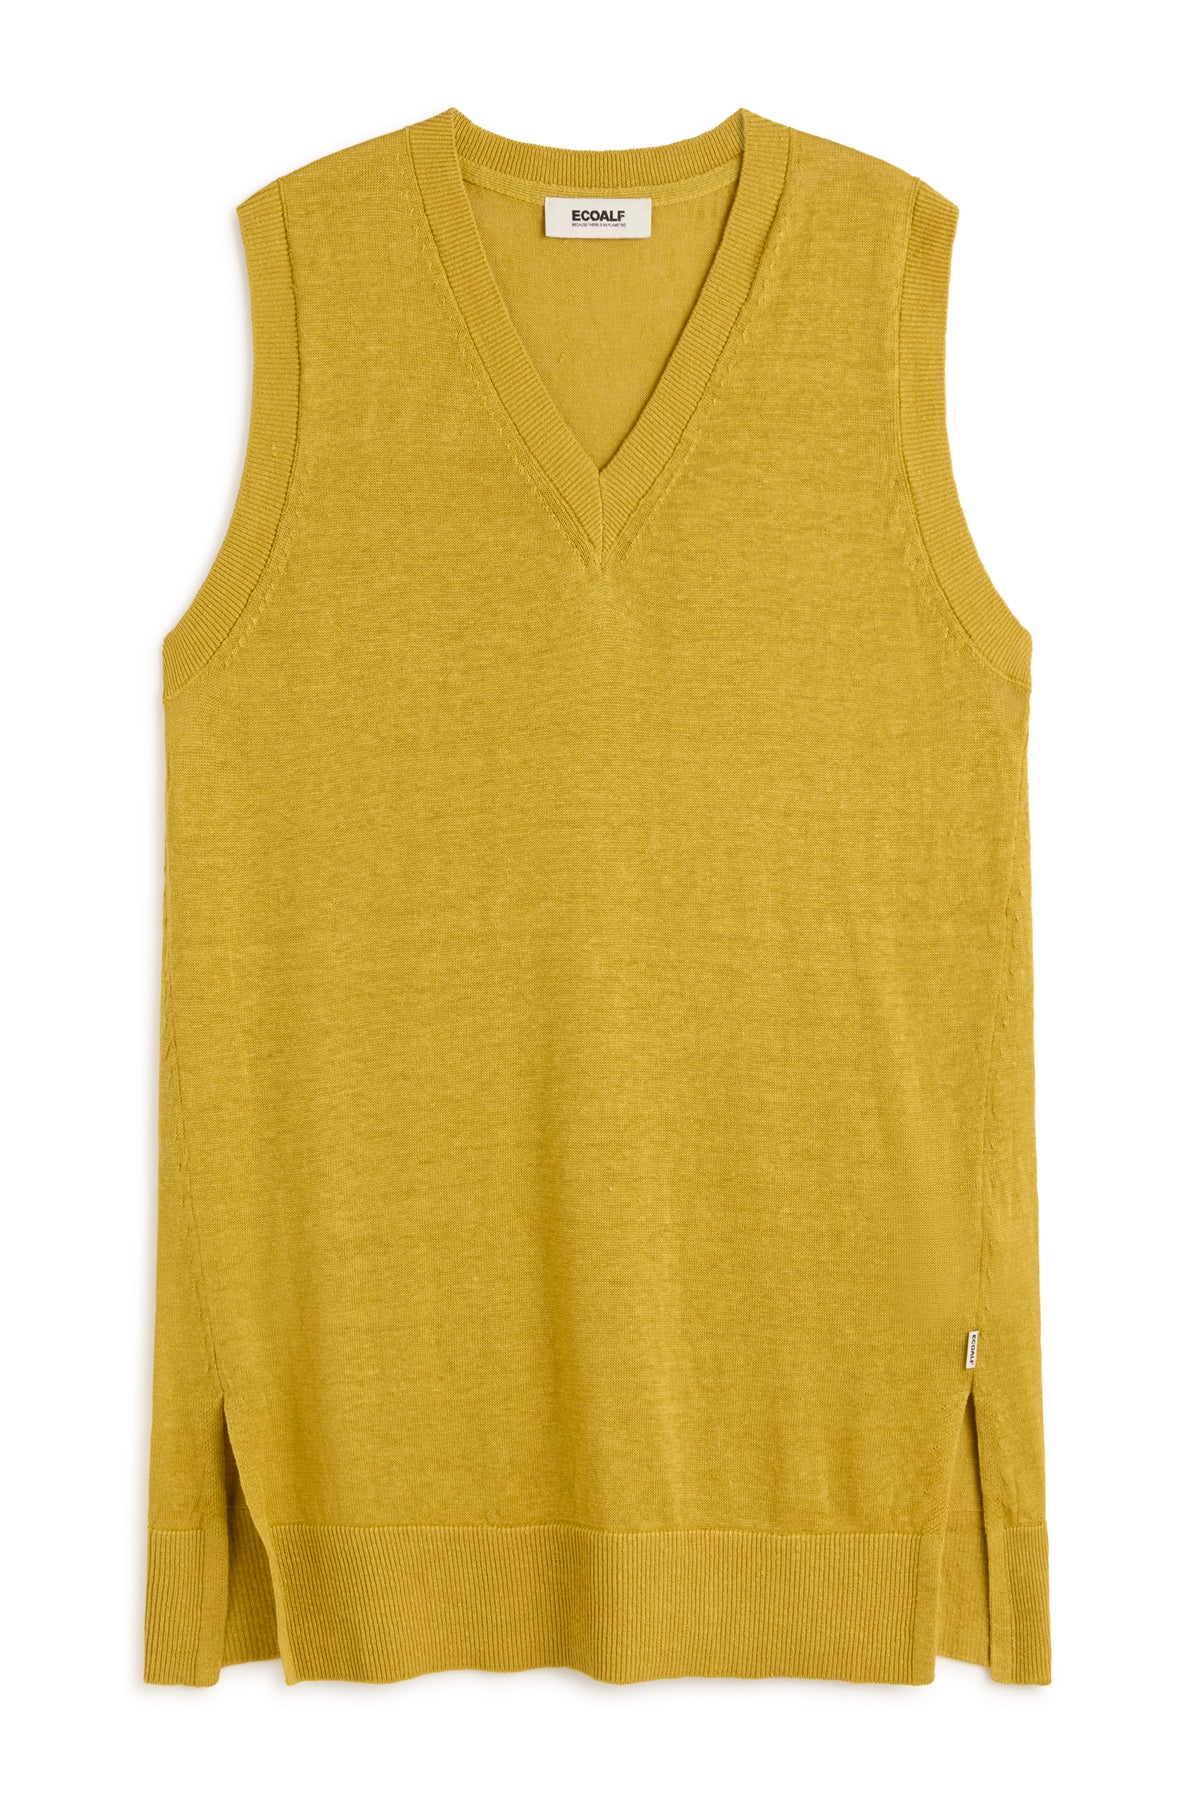 YELLOW TOMILLO LINEN KNITTED VEST